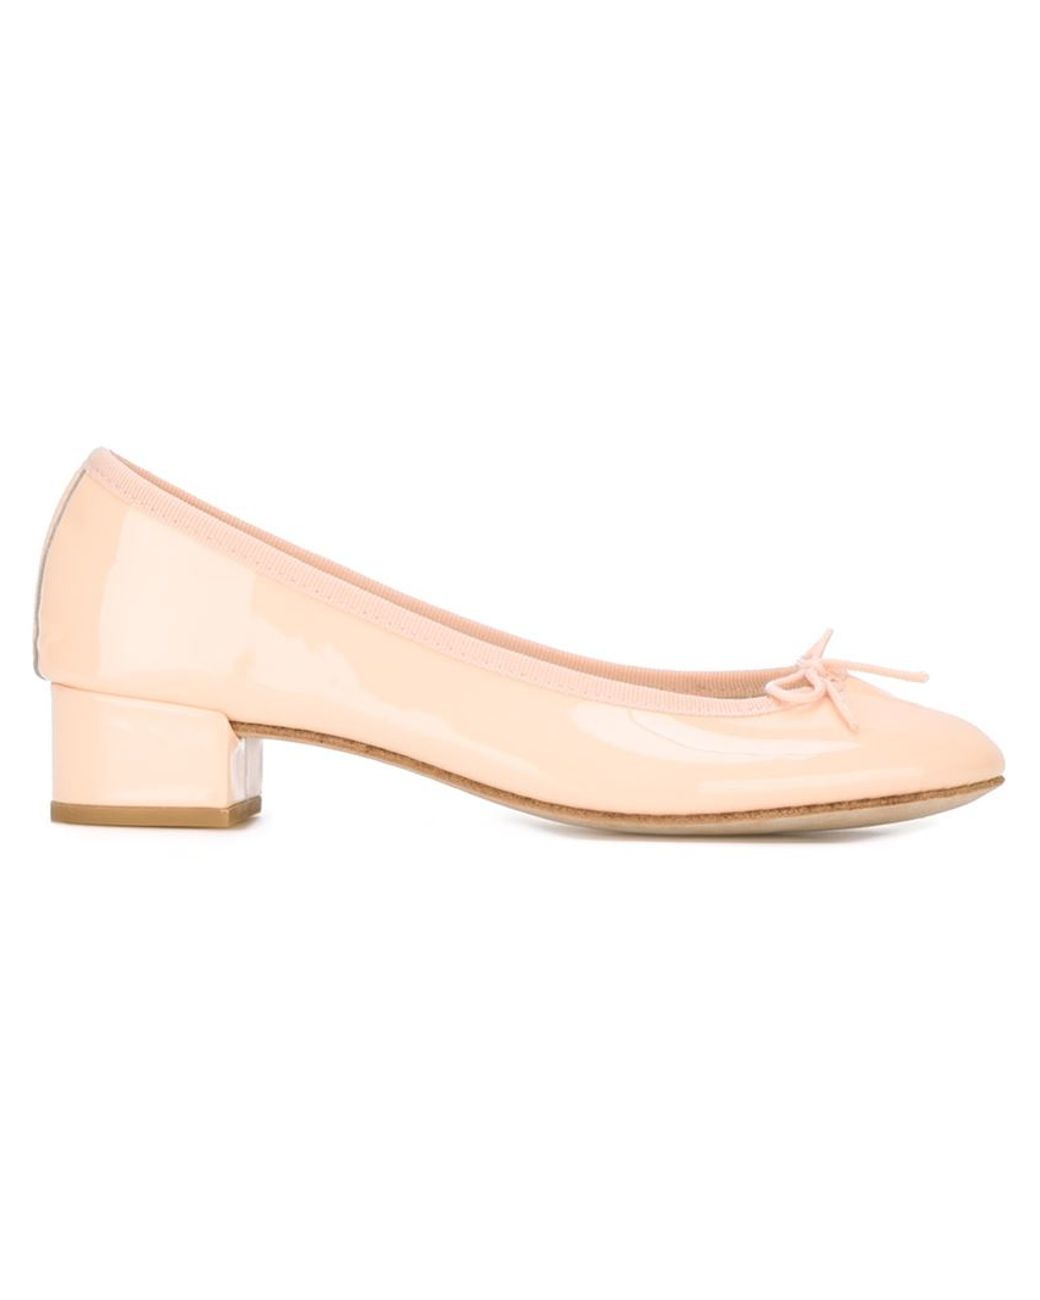 Repetto 'camille' Ballerinas in Natural | Lyst